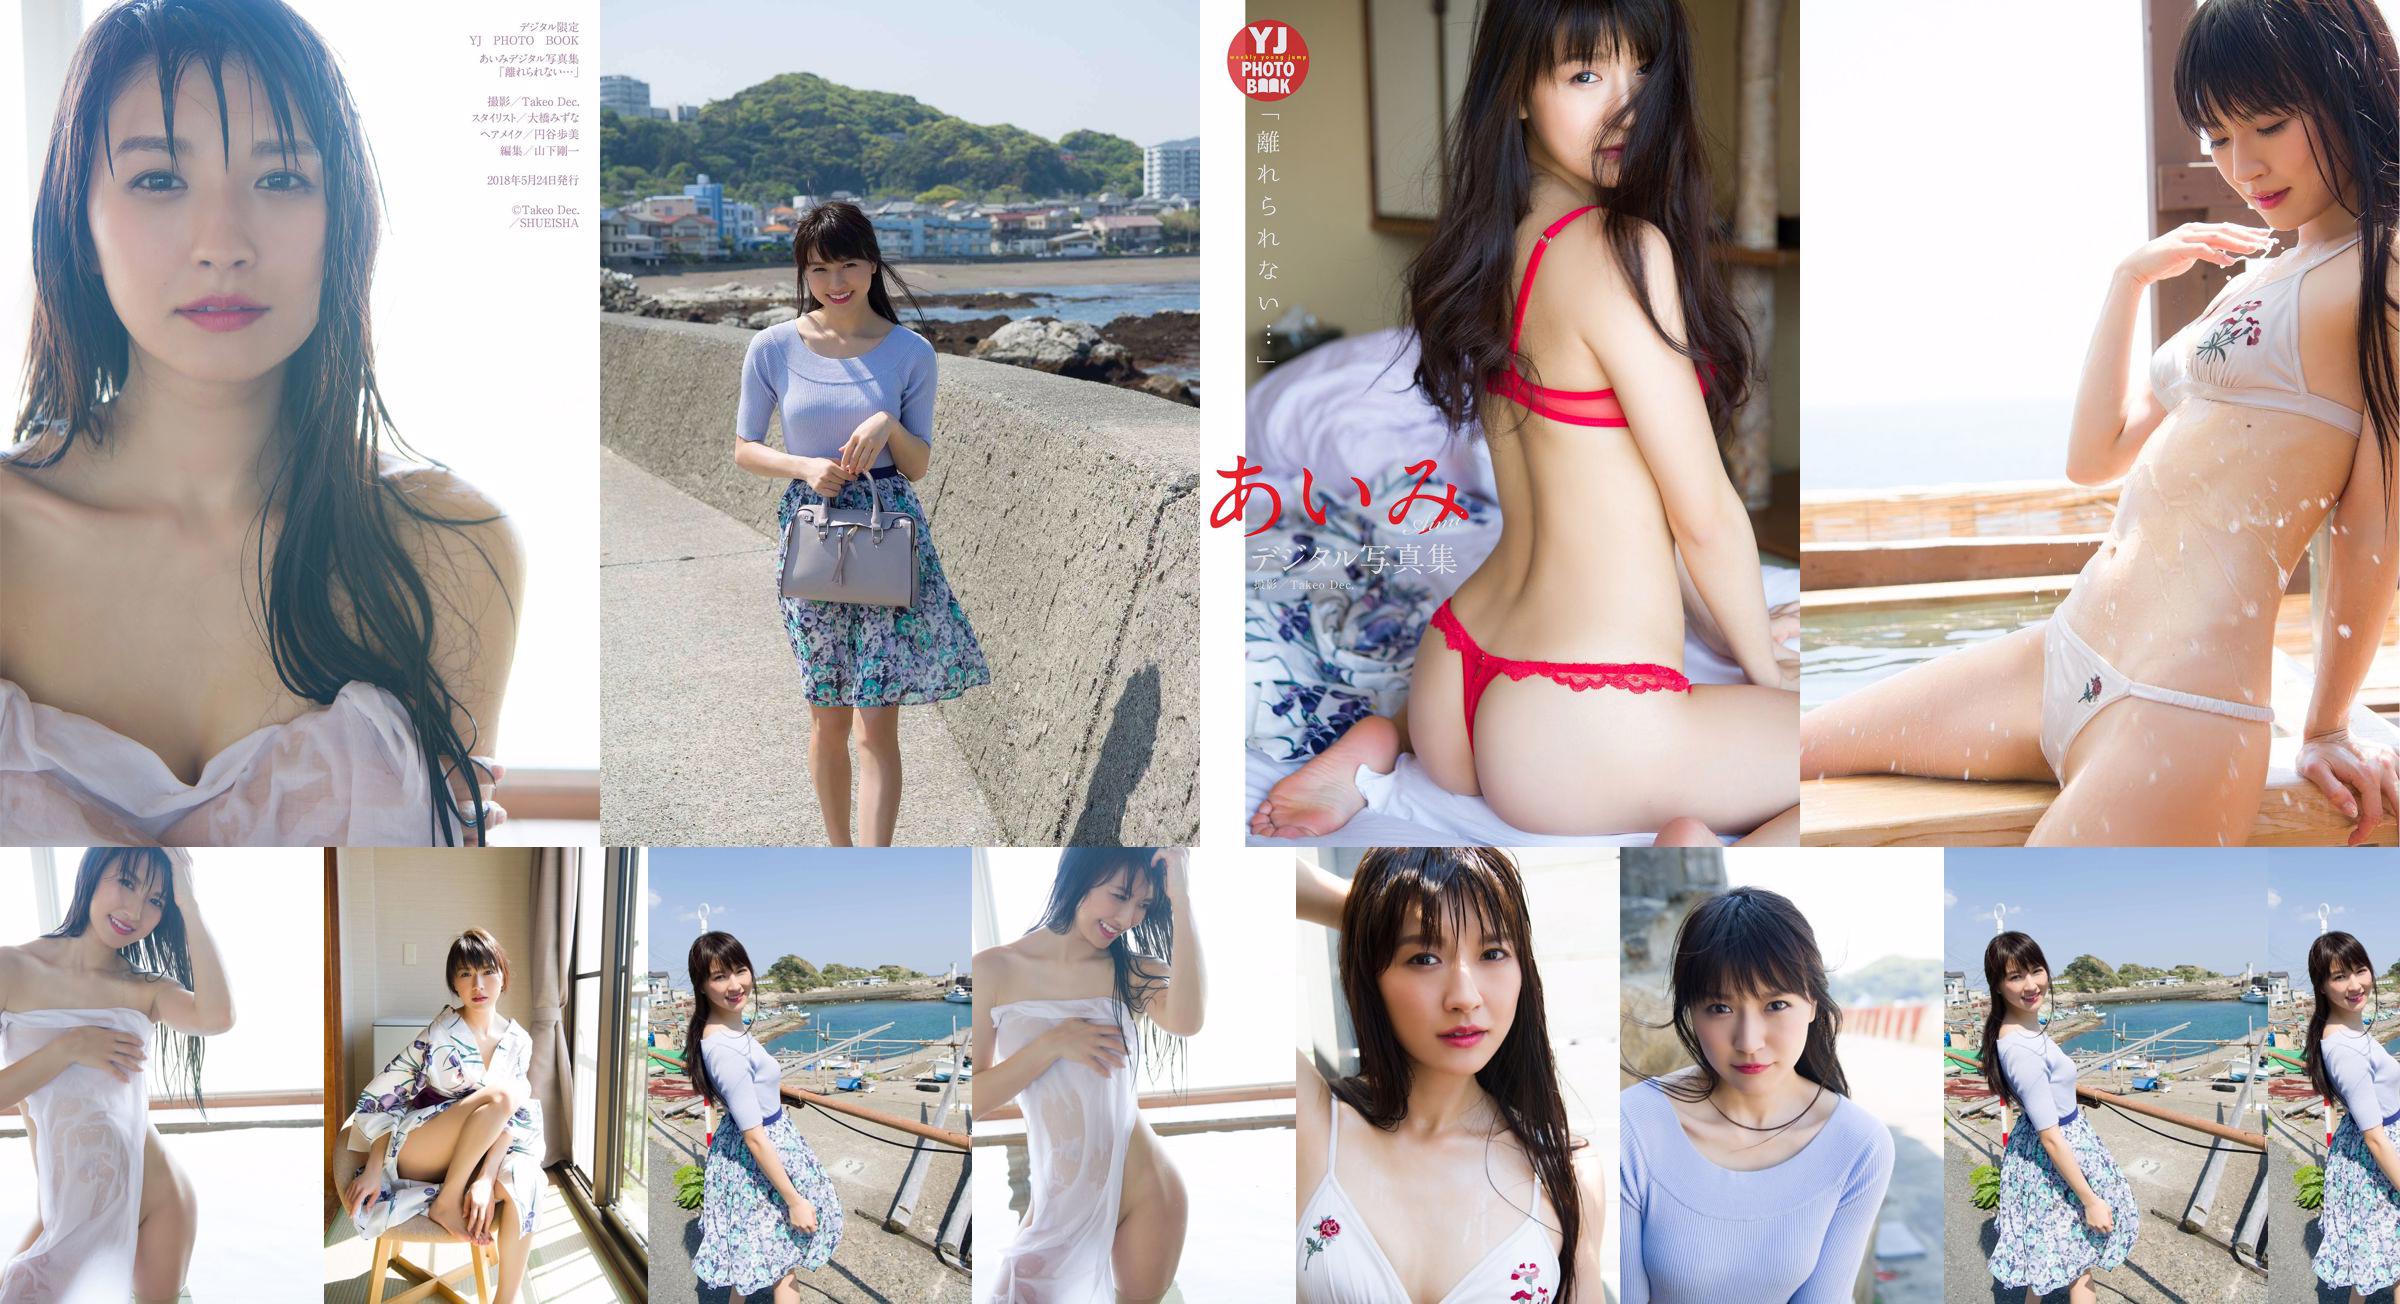 Aimi Nakano "I can't leave ..." [Digital Limited YJ PHOTO BOOK] No.3f9f51 Page 1